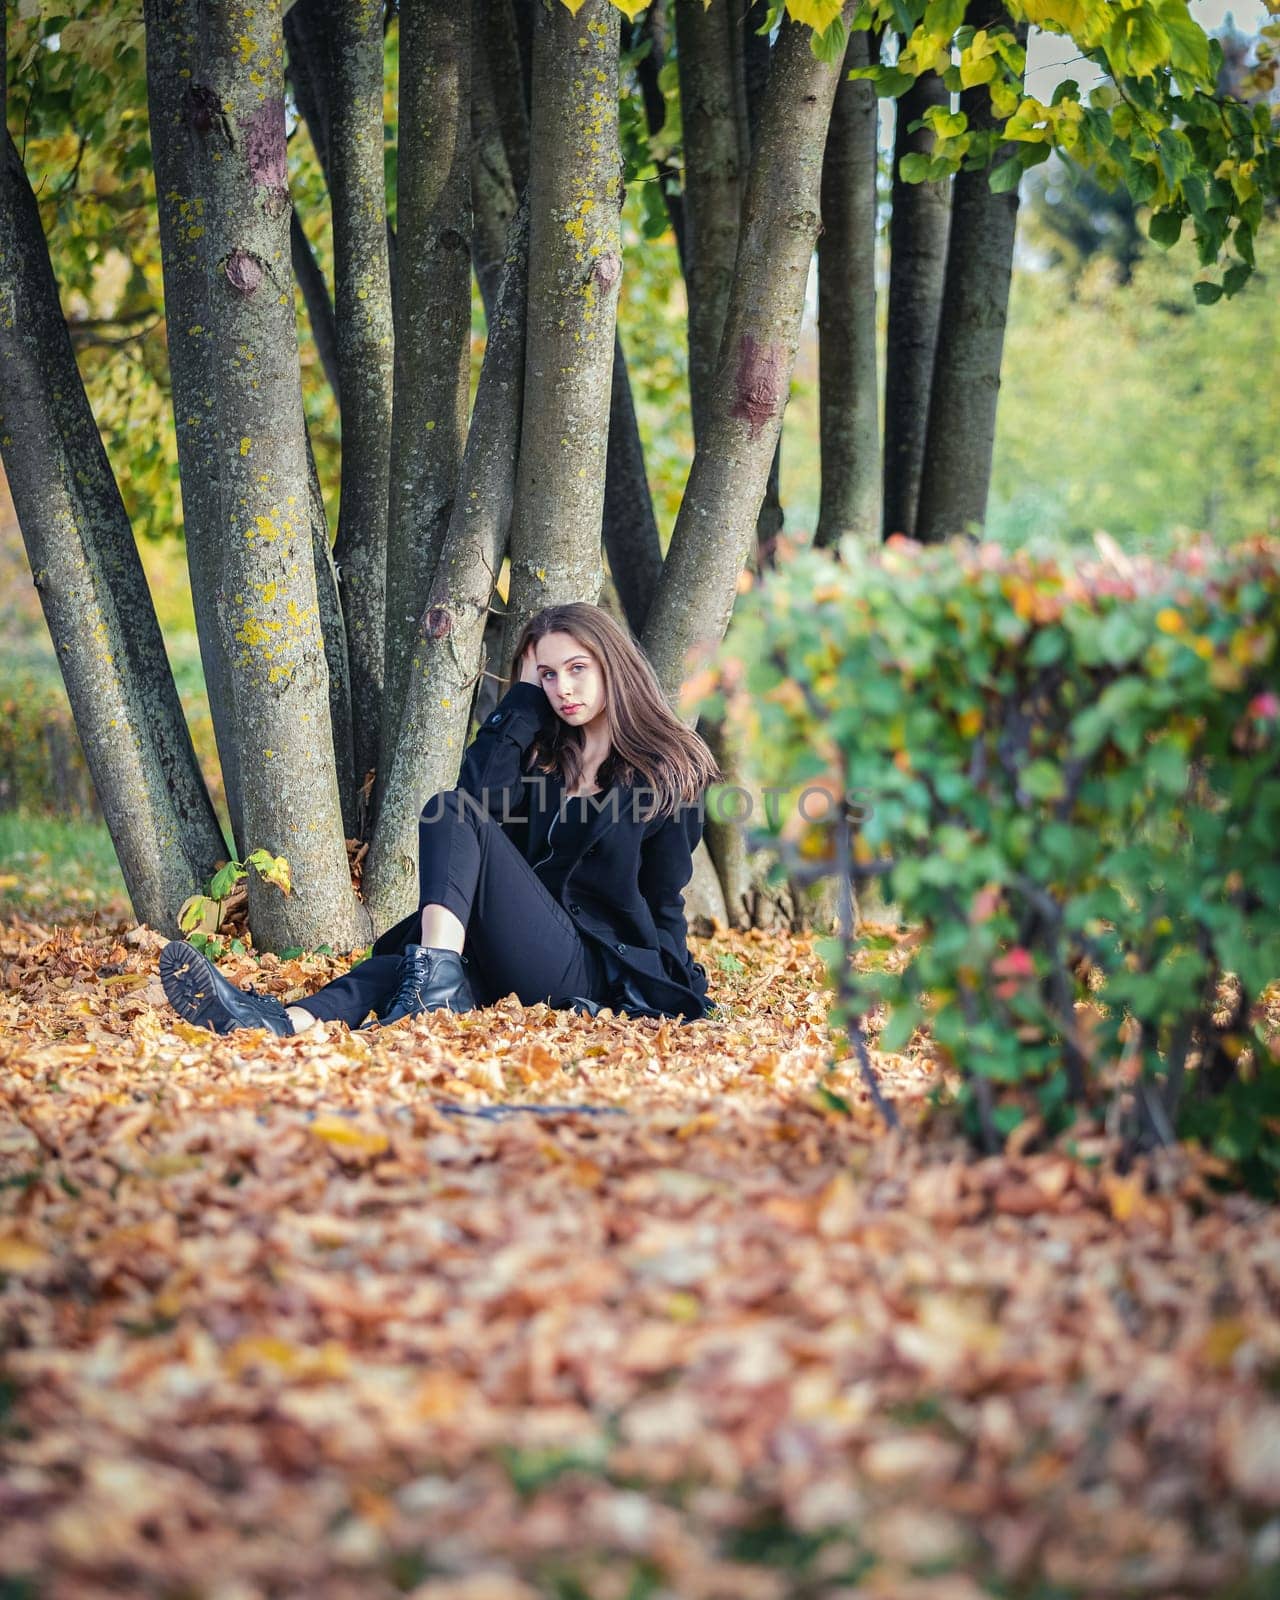 A beautiful girl sits by a tree on fallen leaves in an autumn park. by Yurich32